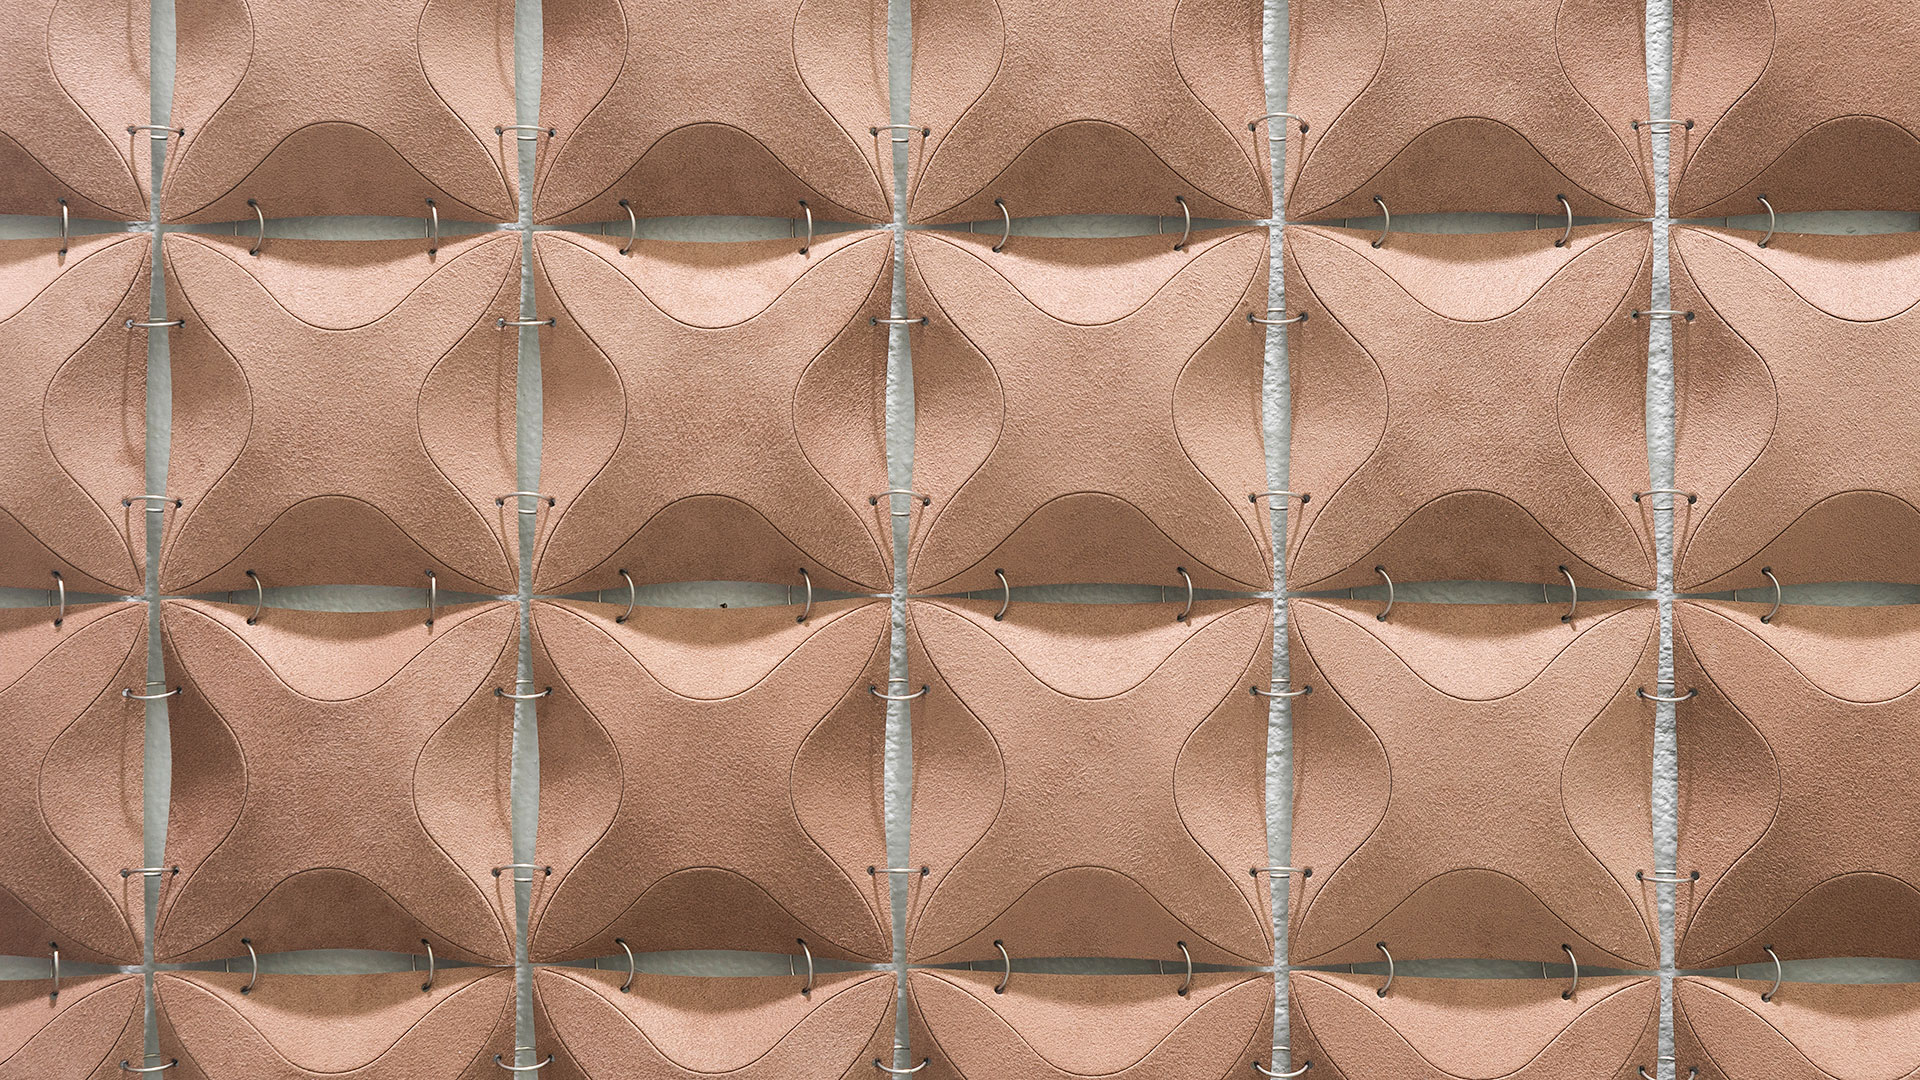 Submaterial construct finite wall hanging made from knoll ultrasuede in a dusty rose color